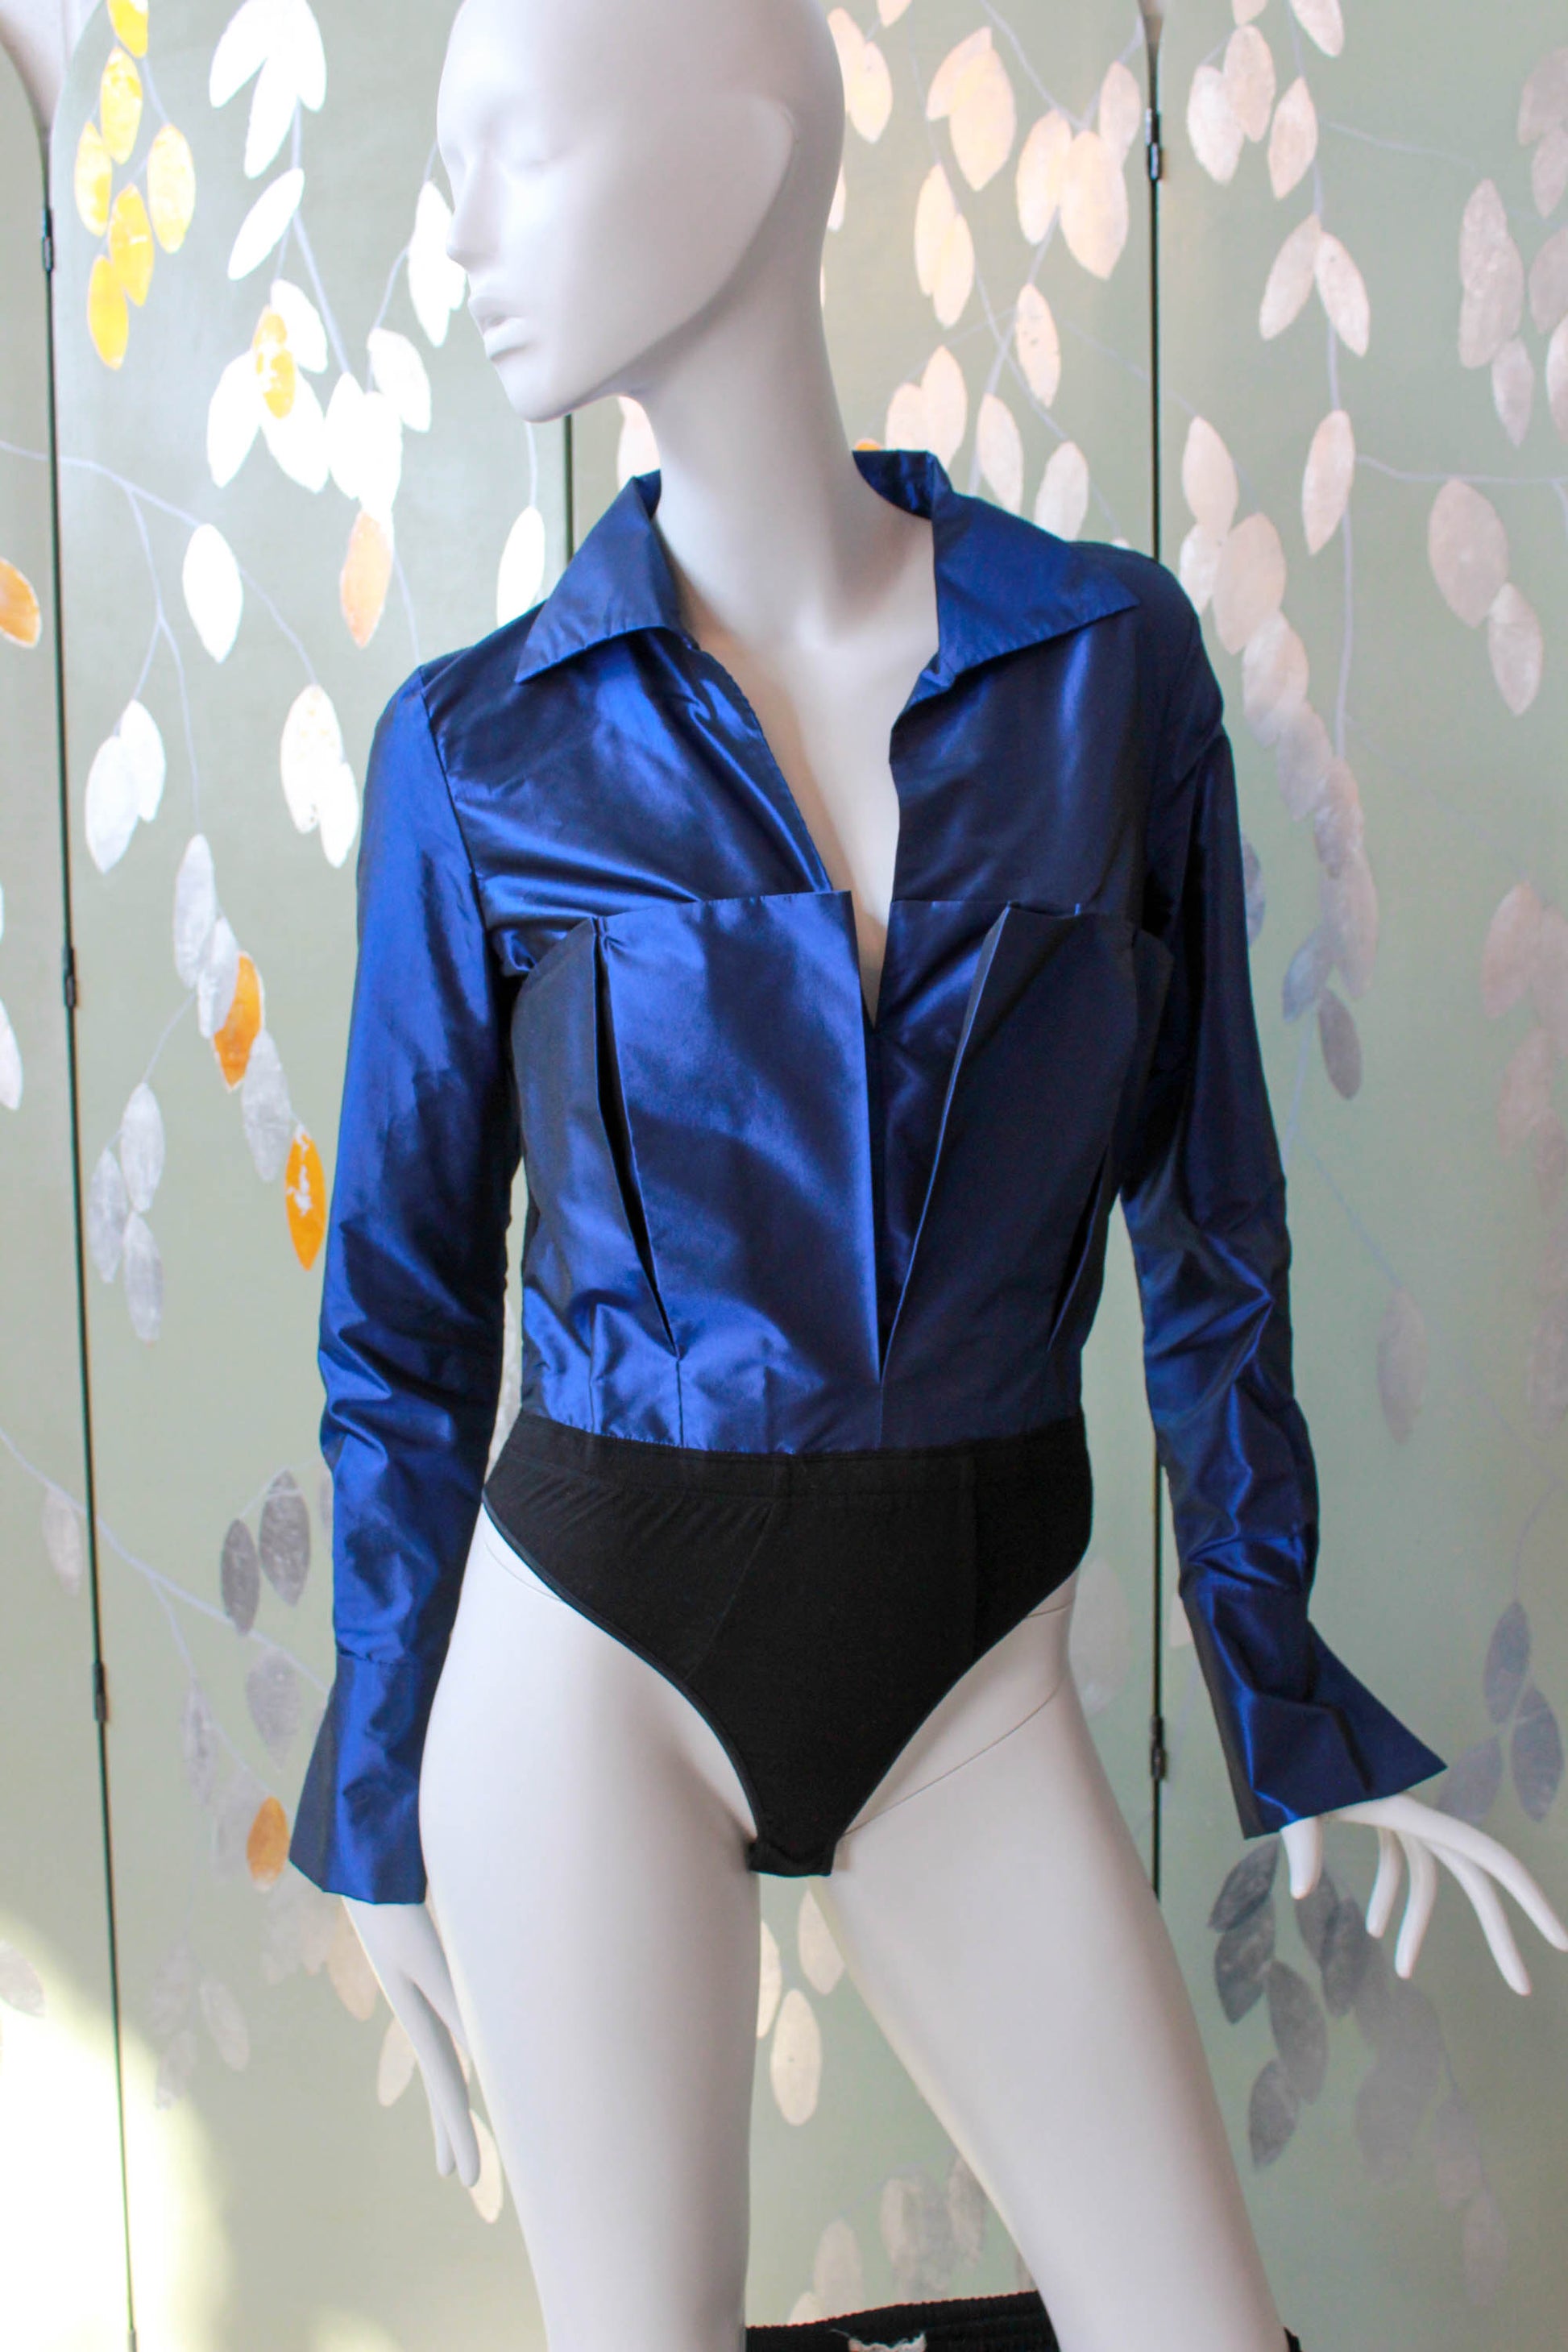 y2k going out top / blouse Donna Karan New York DKNY Iridescent blue collared bodysuit blouse with sculpted front pocket design, long sleeves, v neck and bodysuit design 